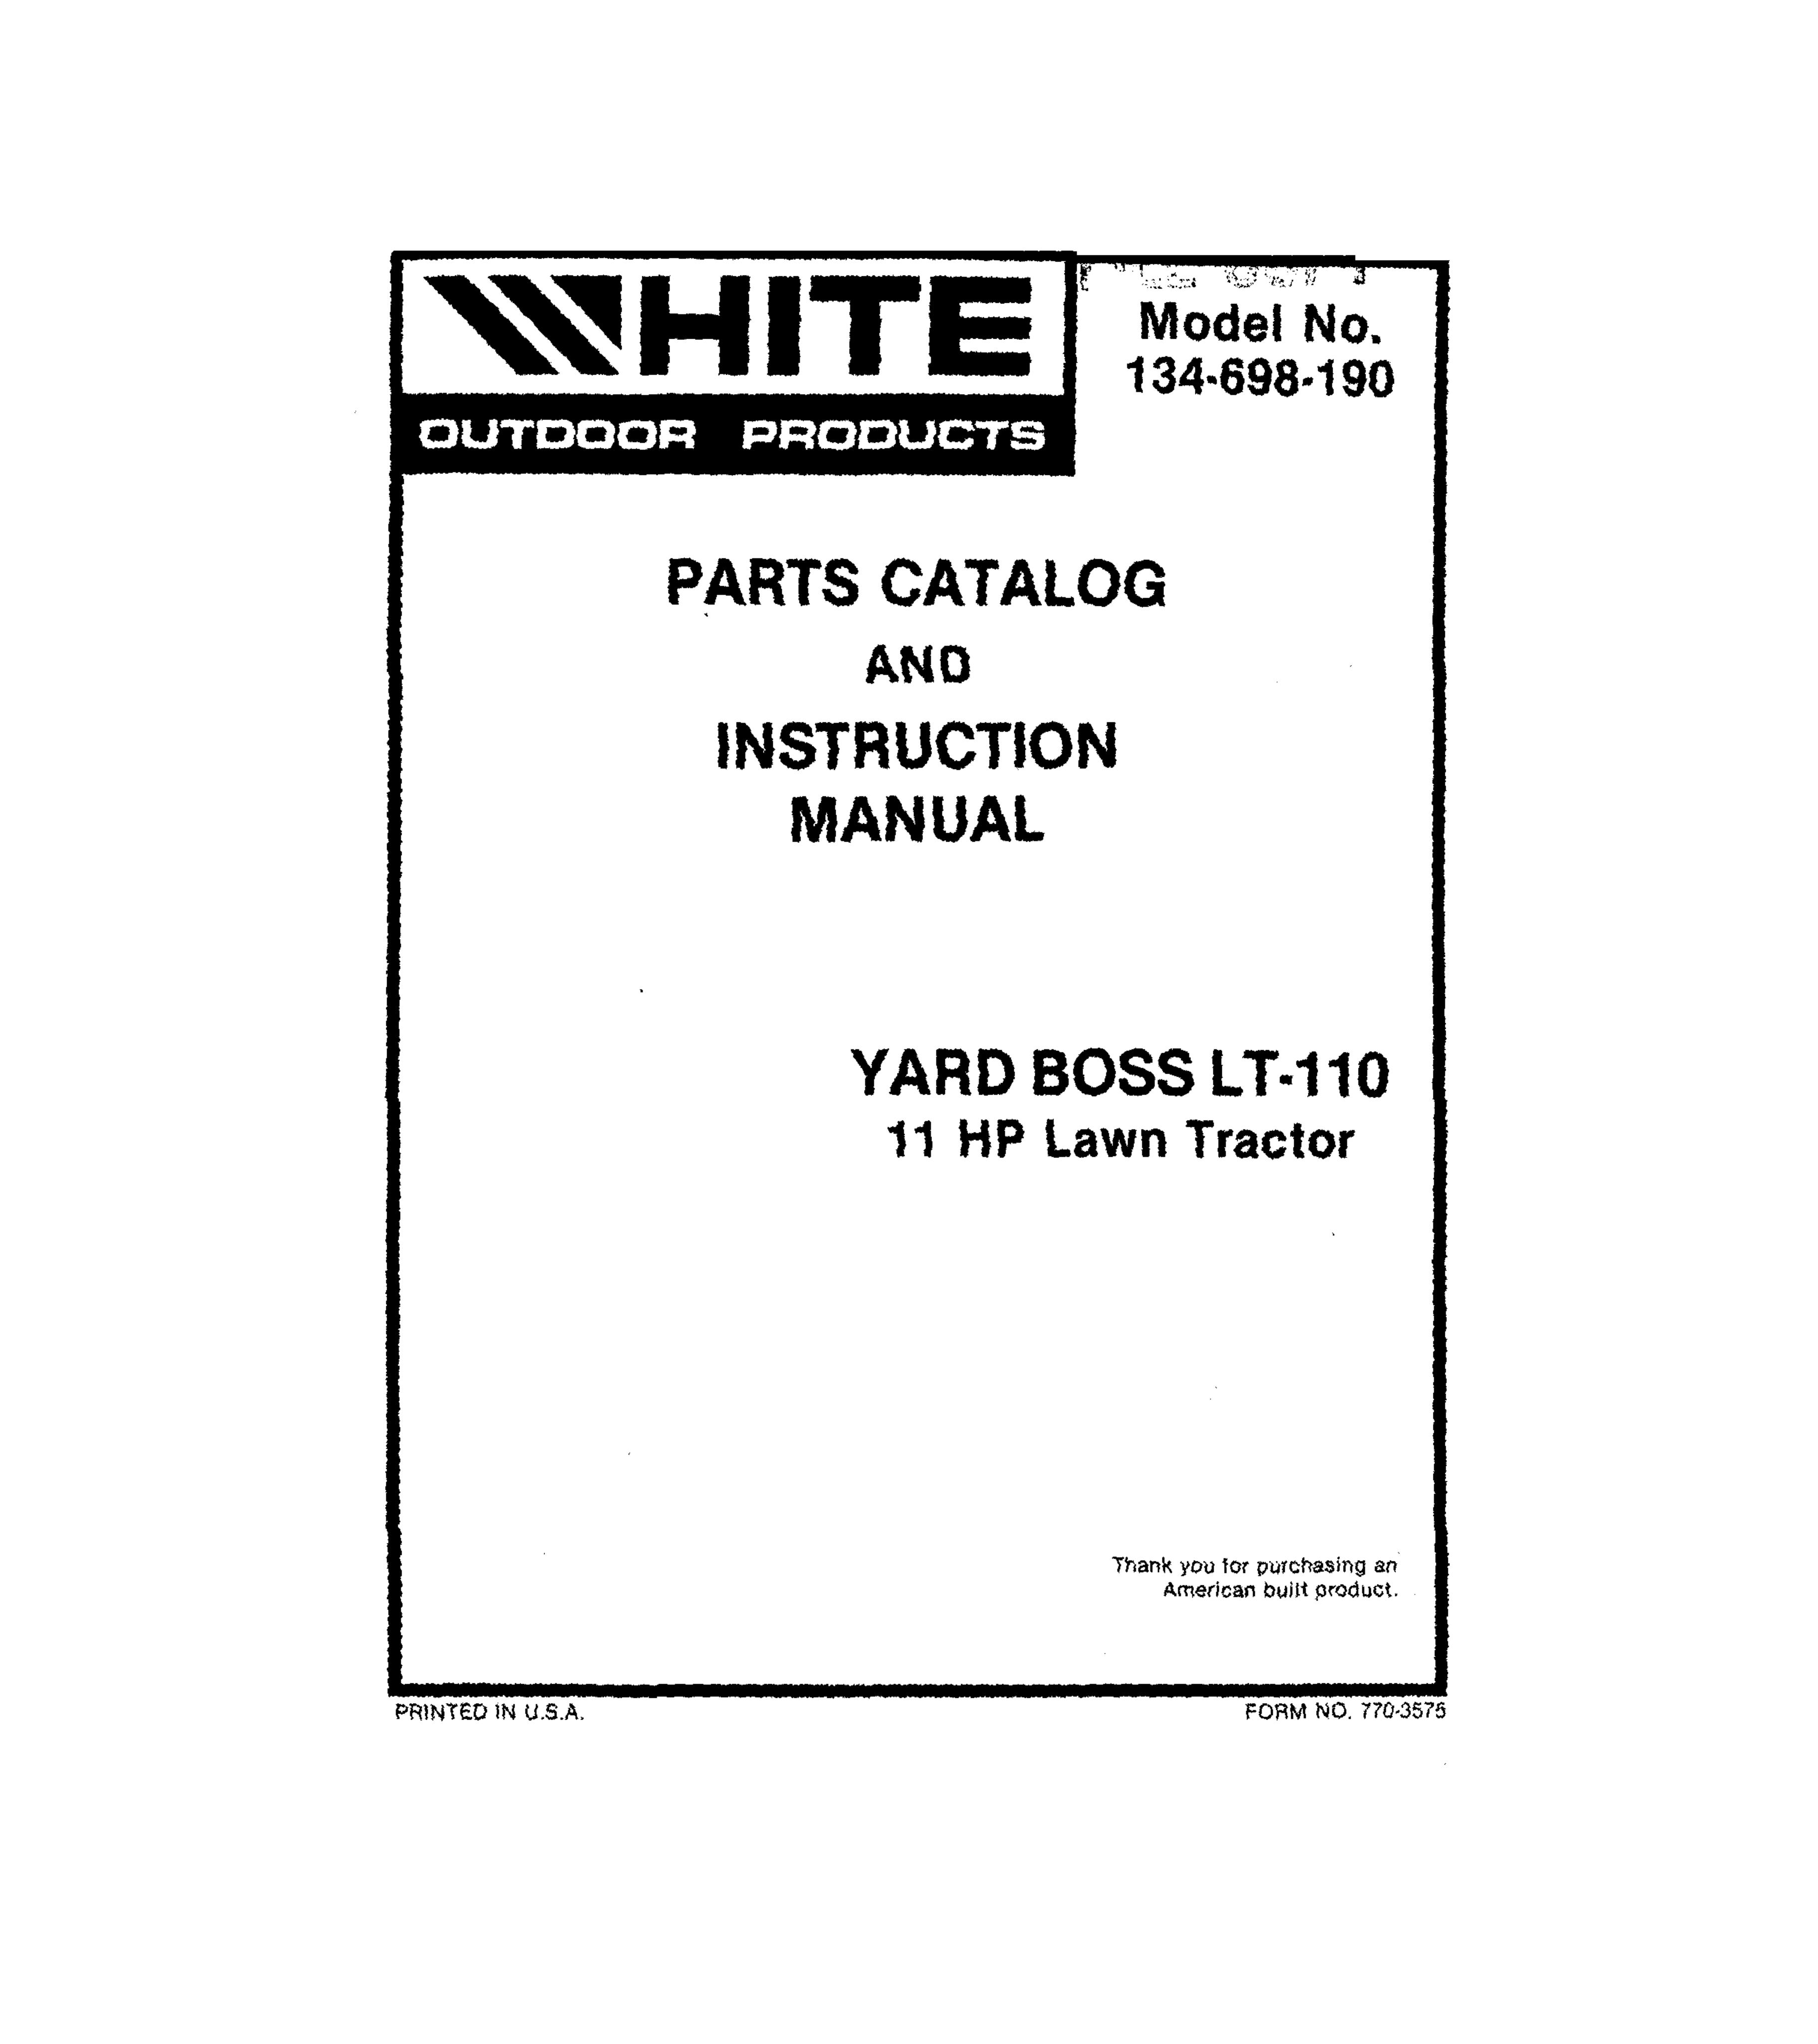 White Outdoor 134-698-190 Lawn Mower User Manual